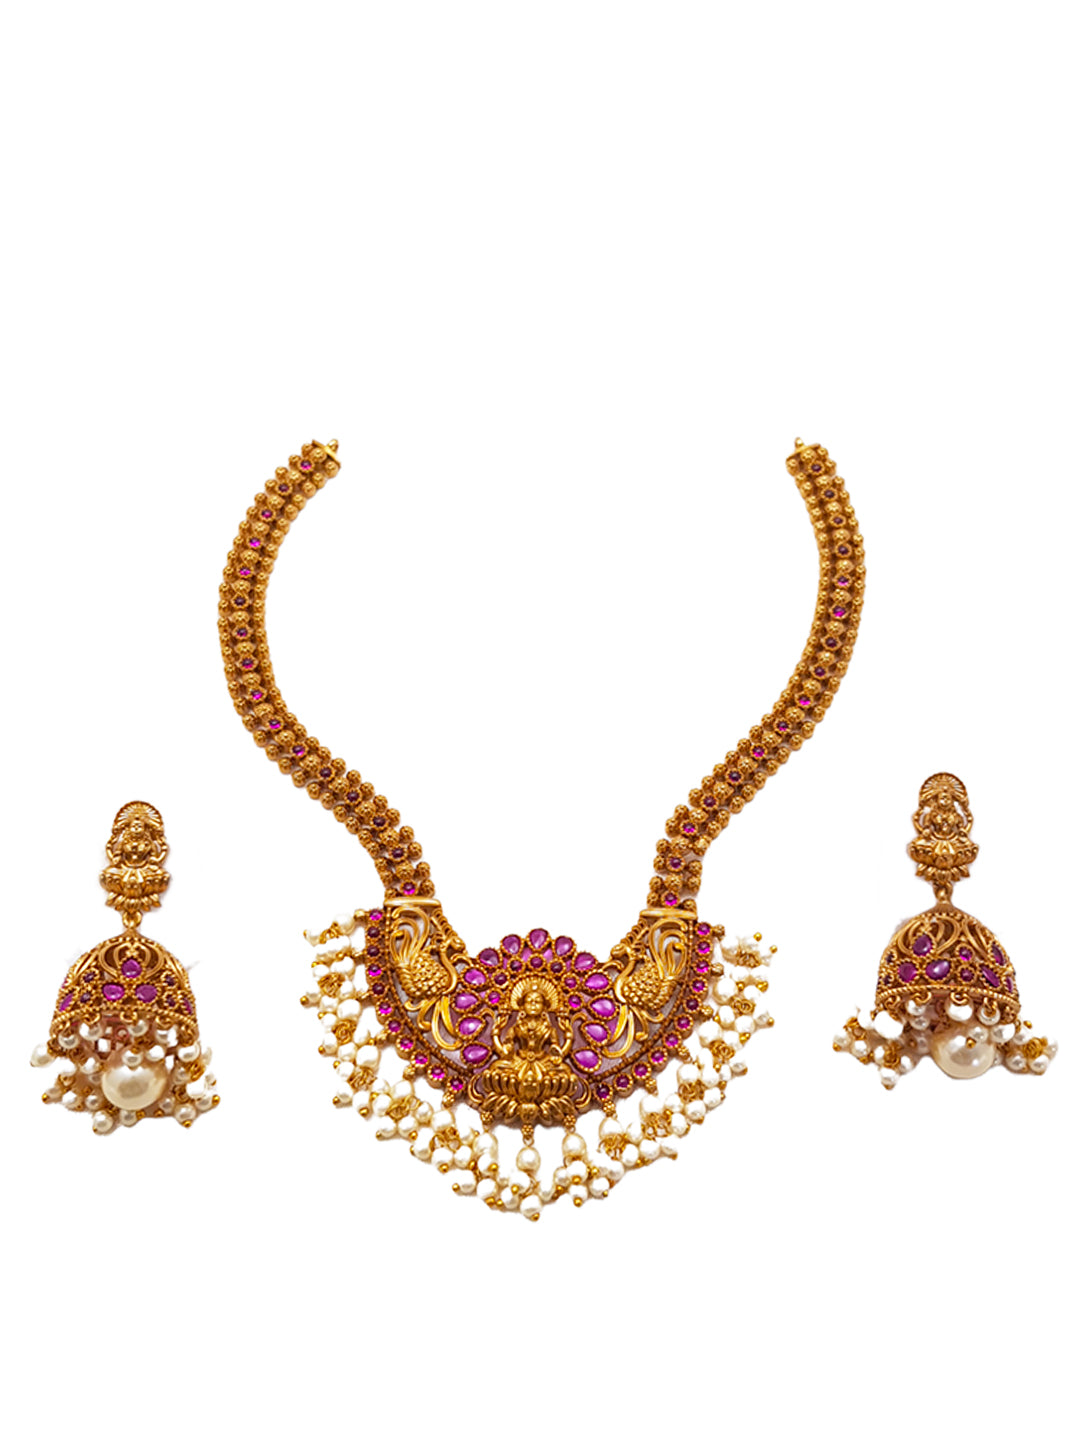 Premium Gold Finish Long Laxmi Hara Necklace set with pearls 5794N-Necklace Set-Griiham-Ruby Red-Griiham